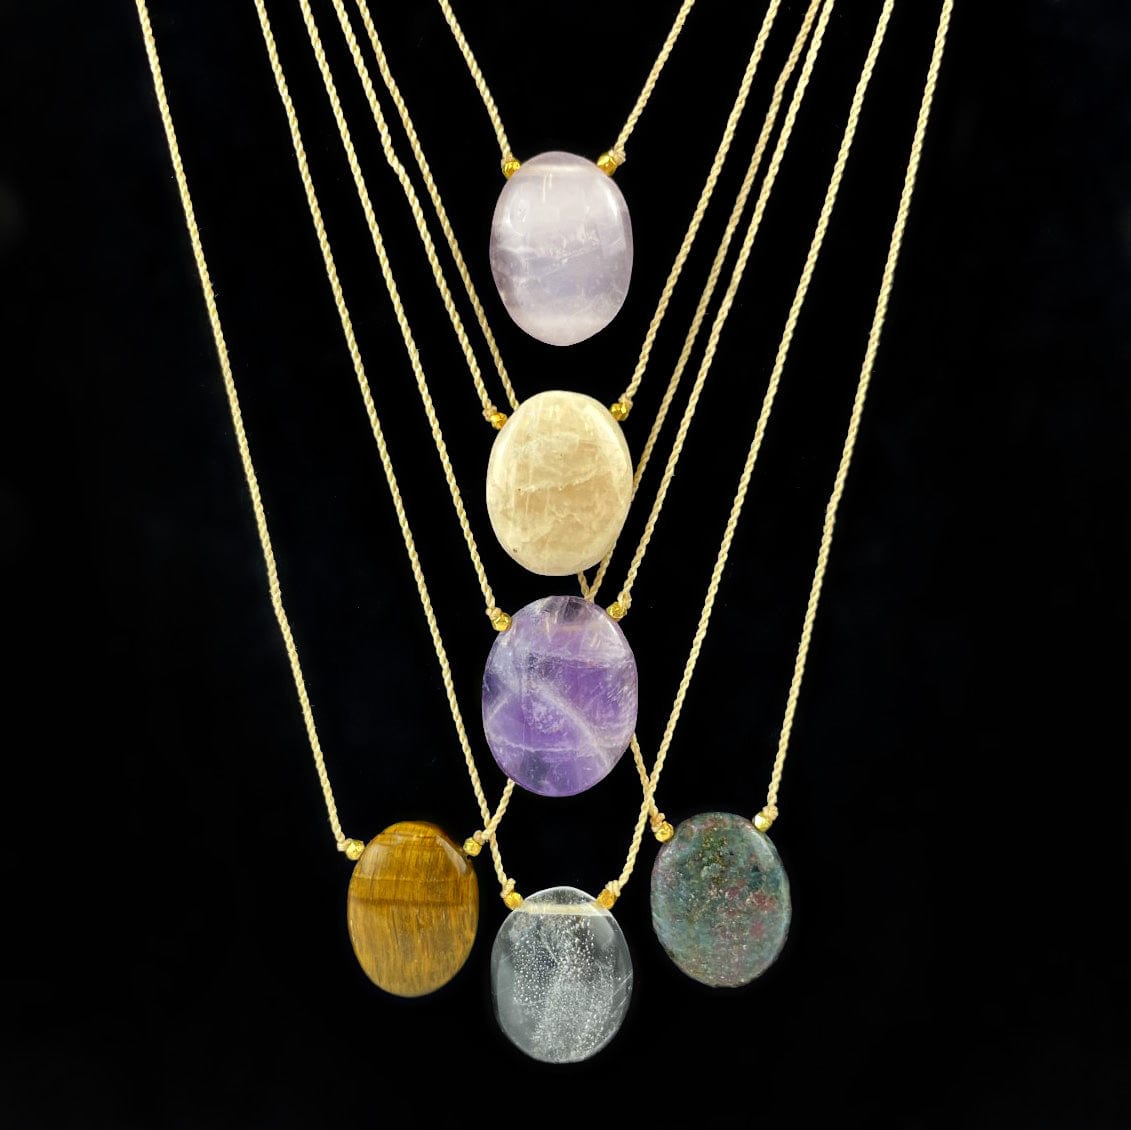 Worry Stone Necklaces hanging on display